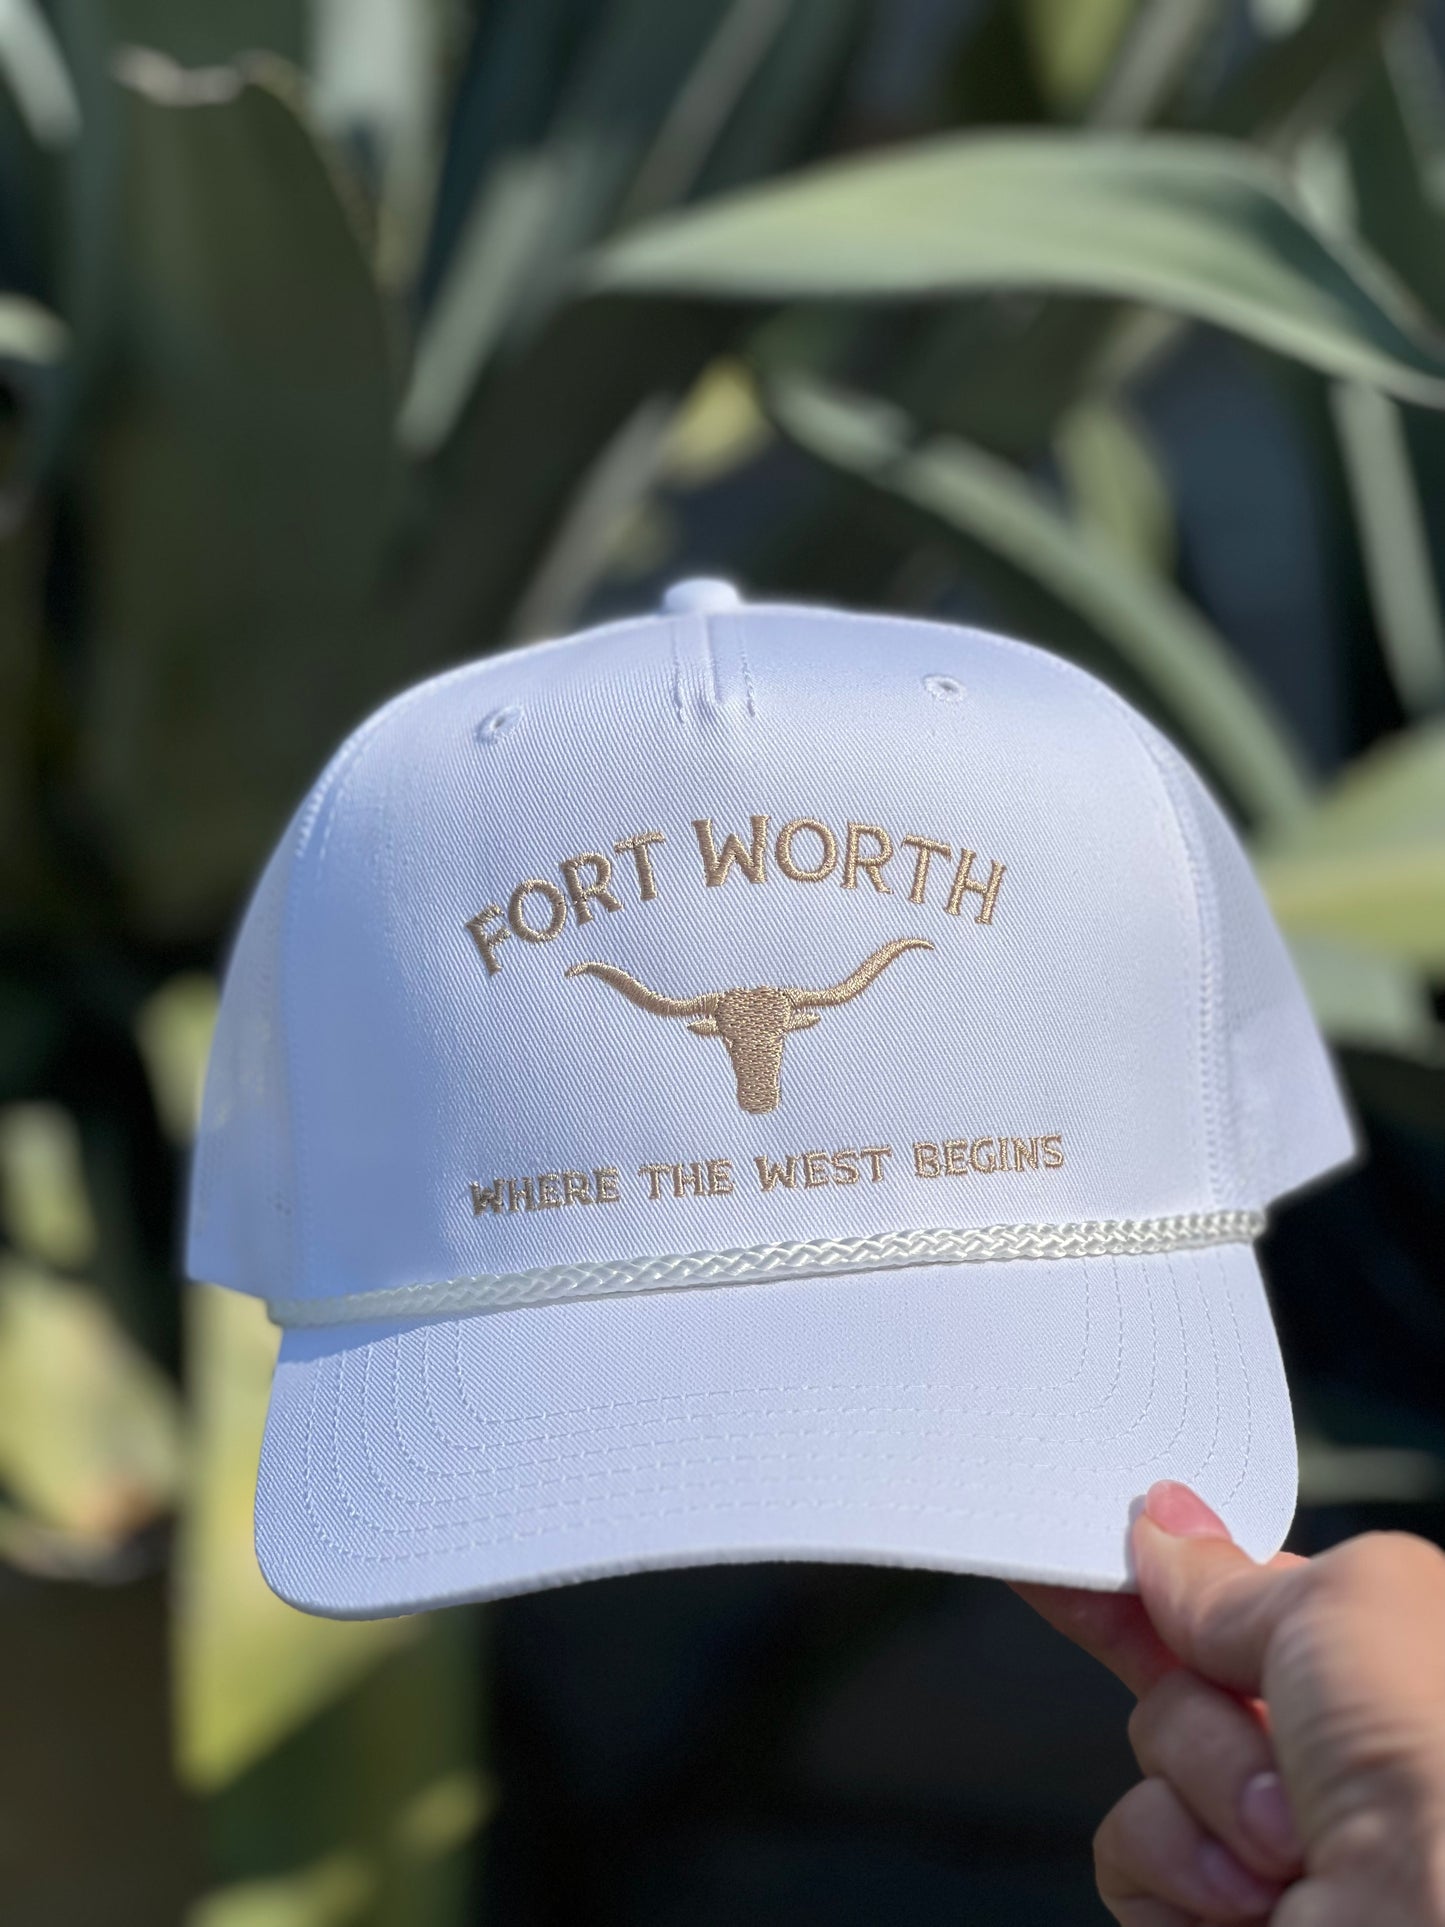 Fort Worth, Where The West Begins - White